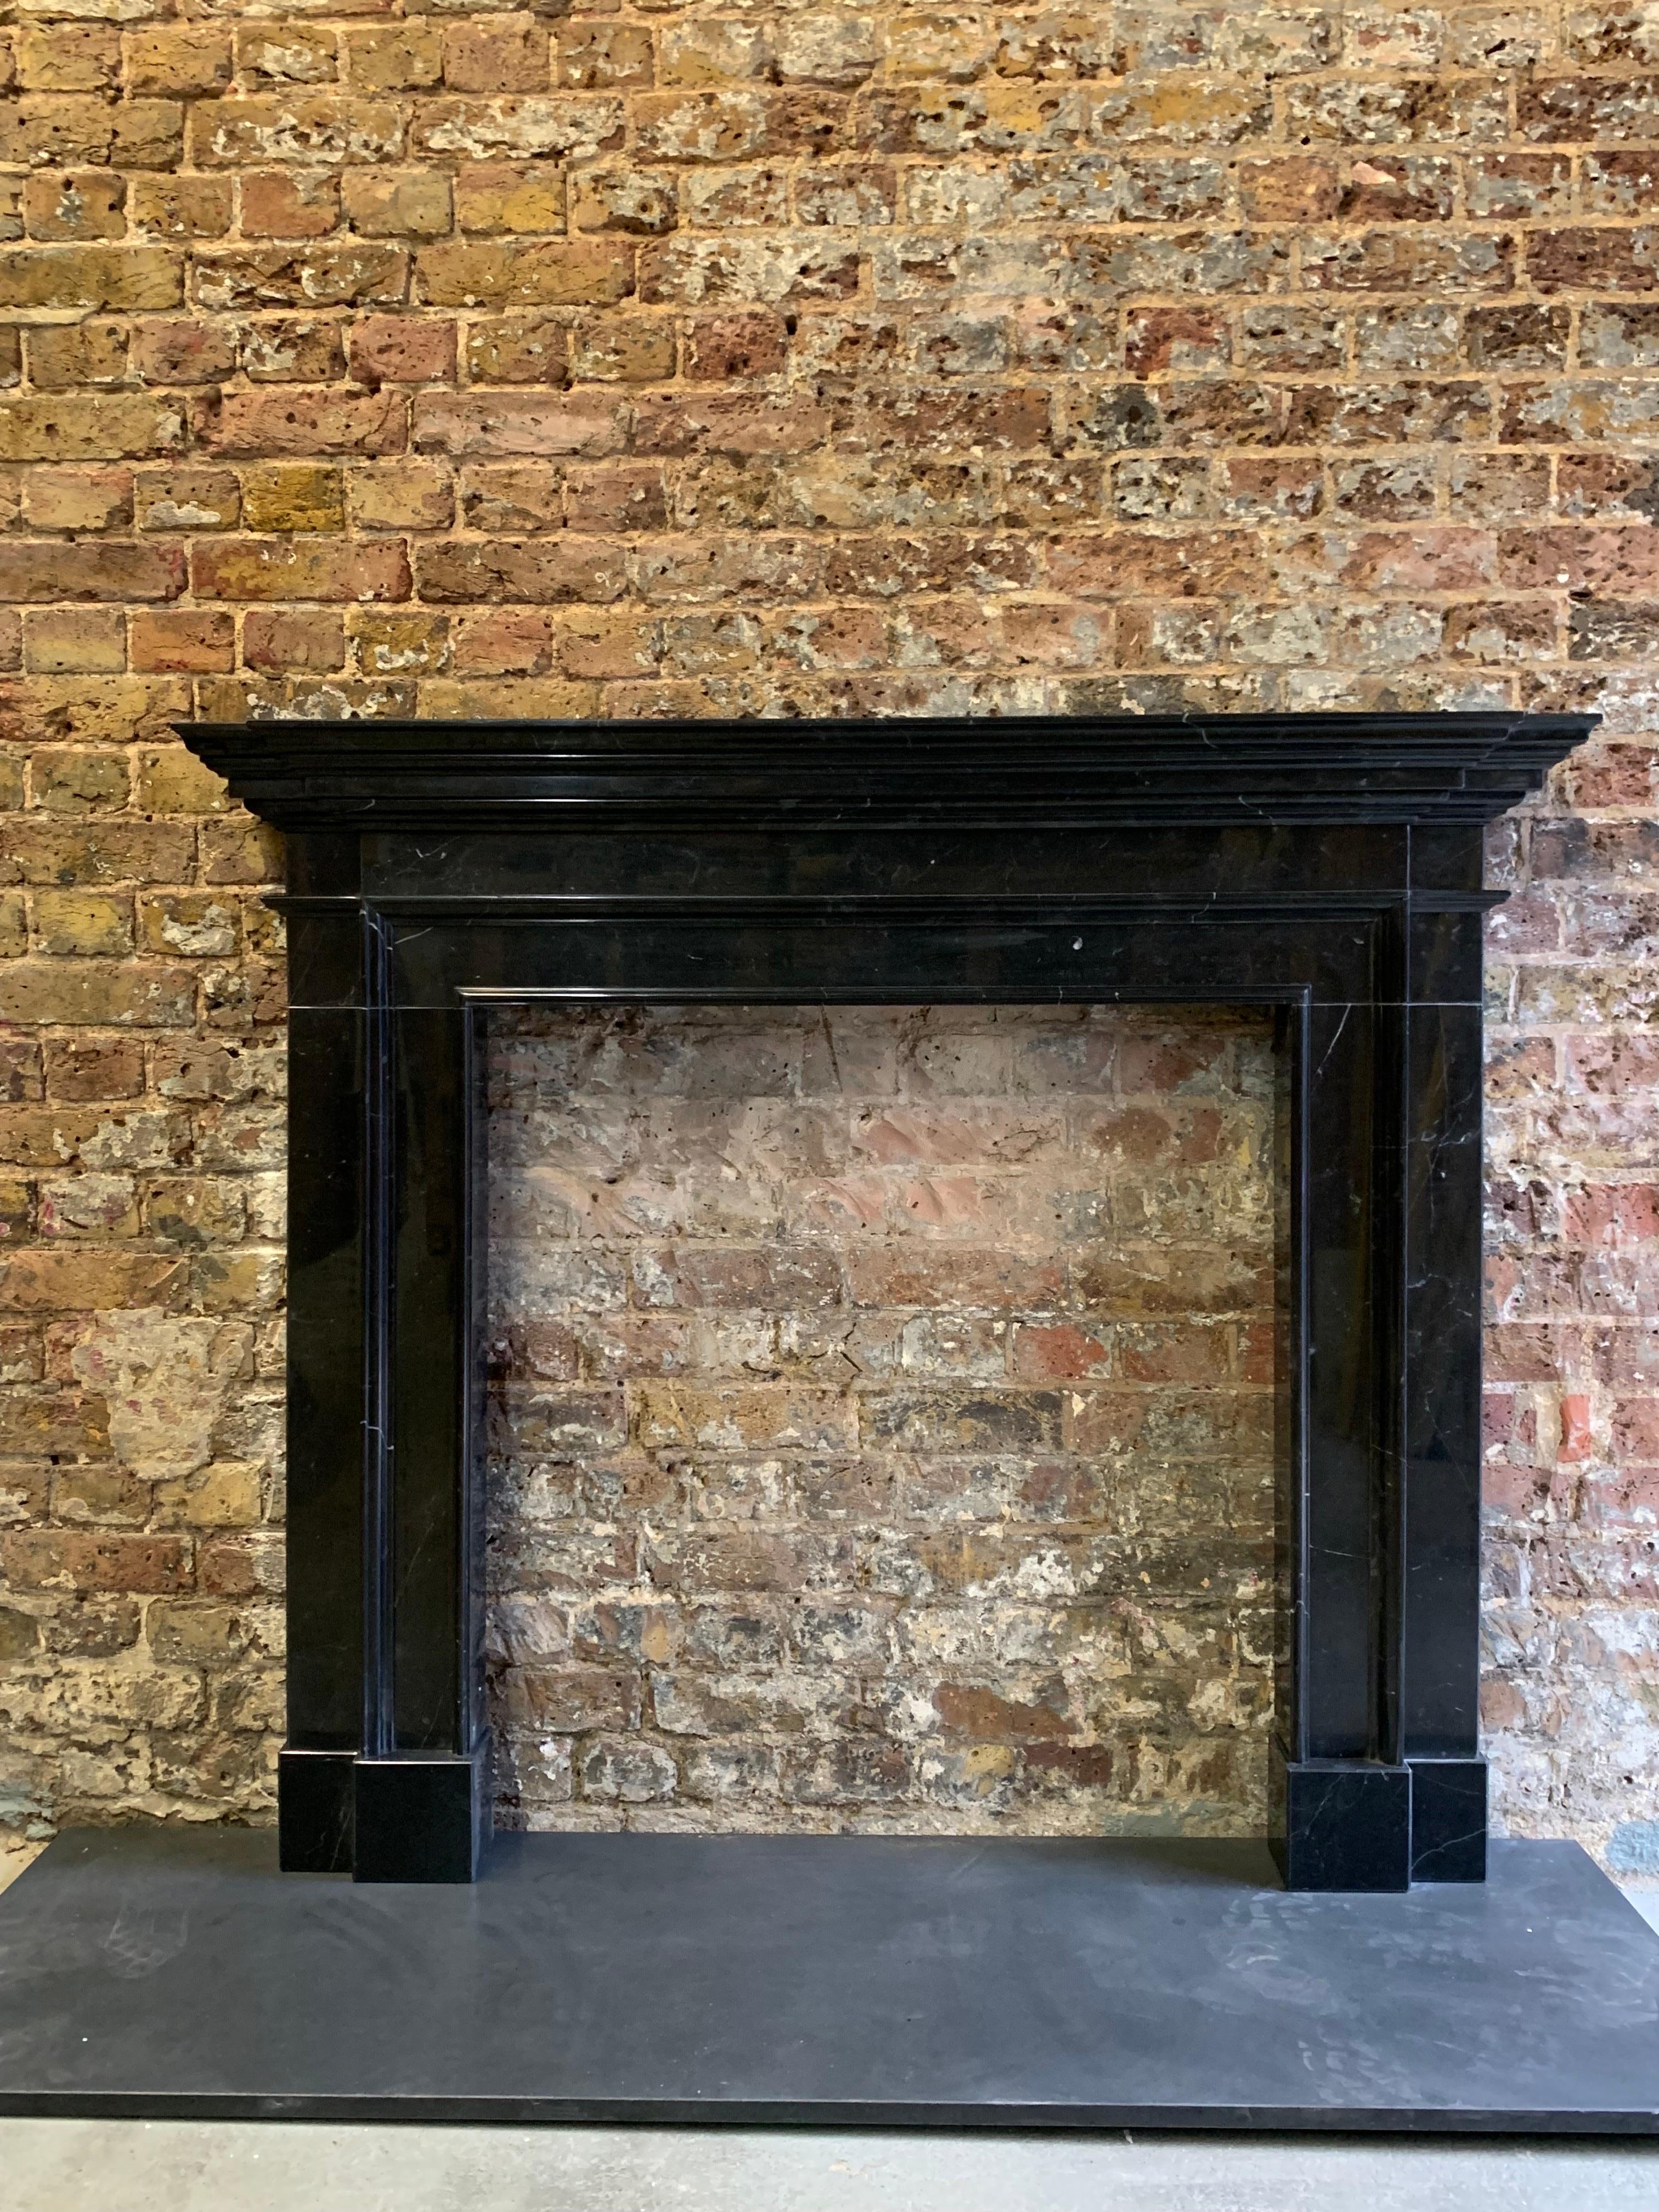 21st Century Black Marble Fireplace Mantlepiece.
Made From Nero Marquina Marble. Hand Carved And Lightly Polished.
Simple Georgian Classic Design.

Dimensions:
Shelf Width 54